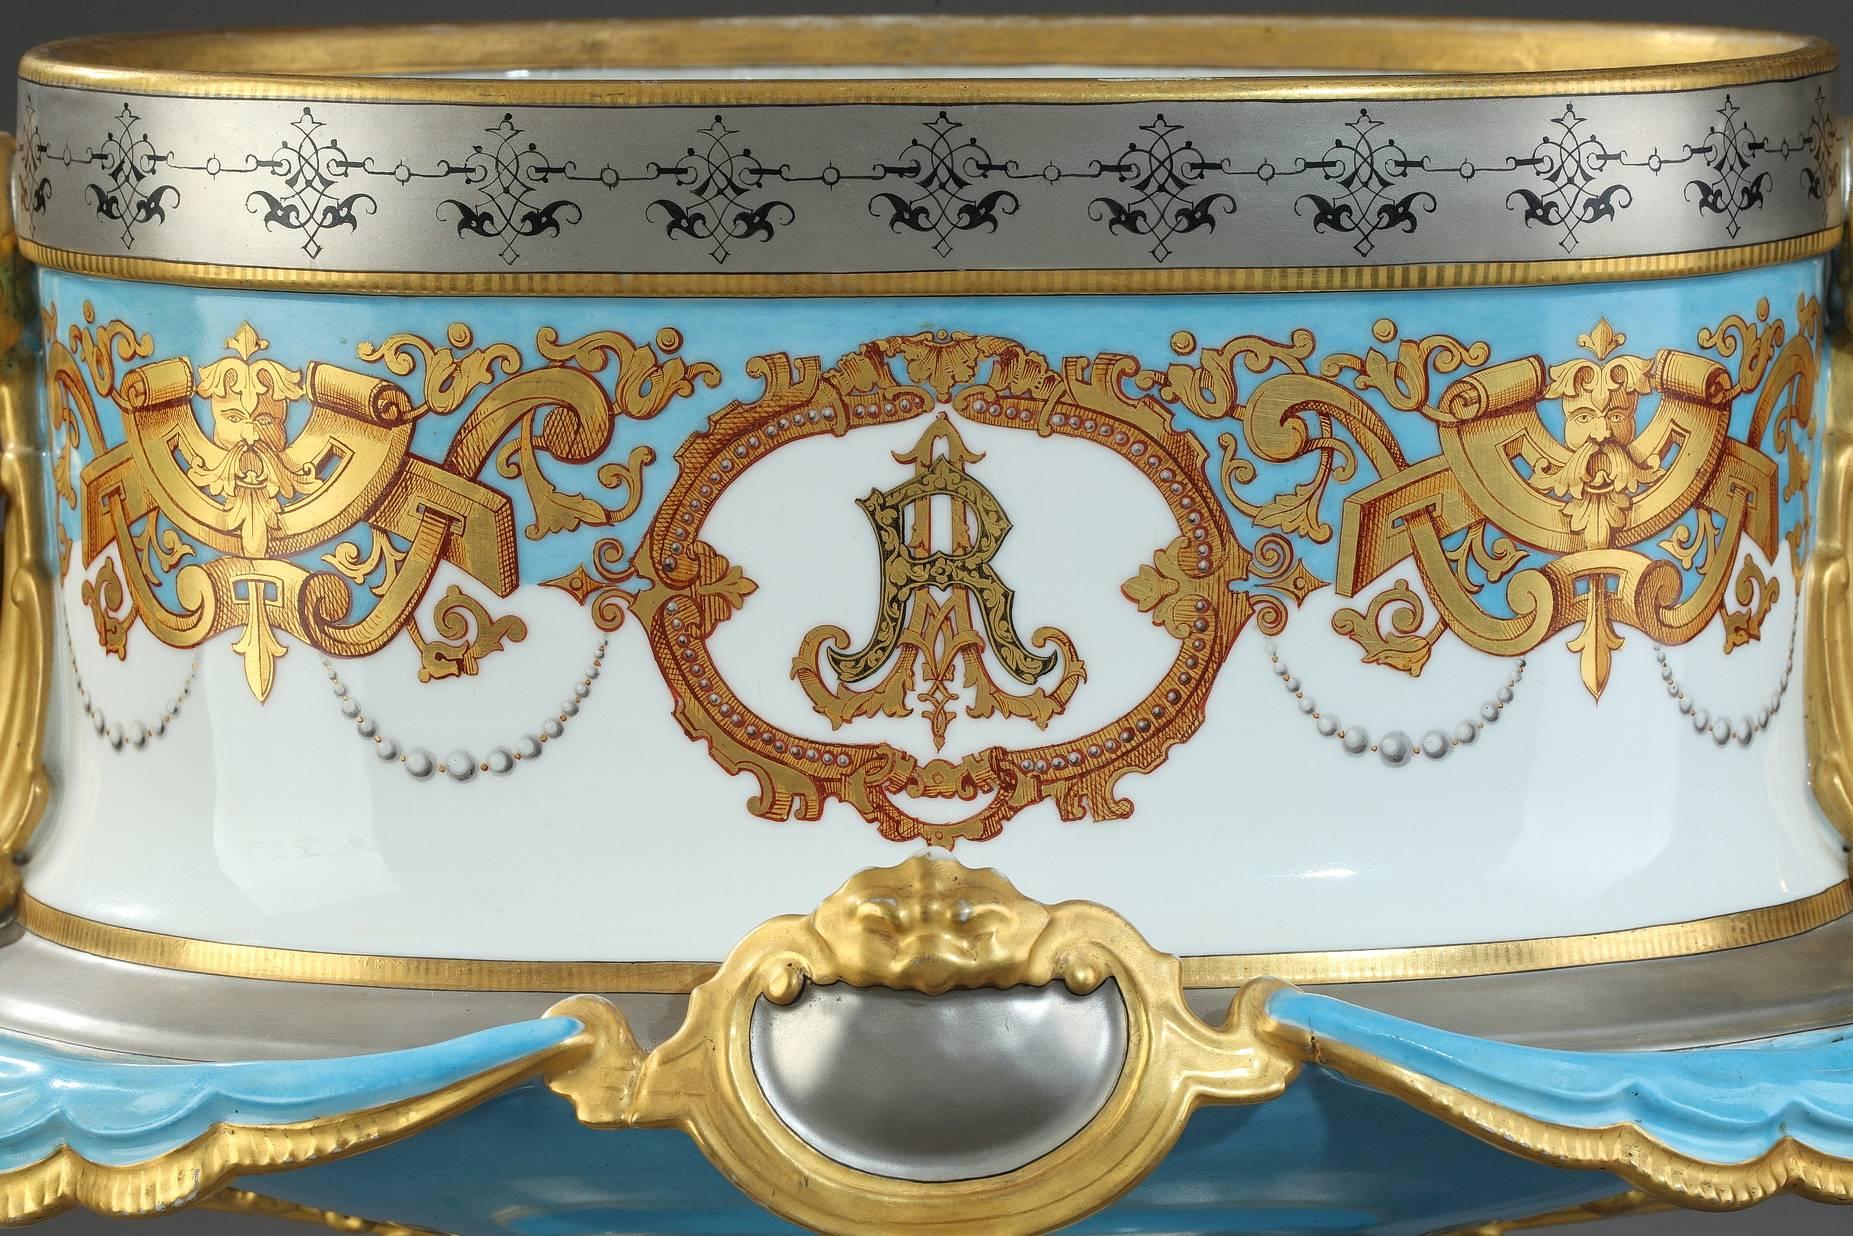 Large 19th century porcelain jardinière. It is decorated with gilded masks, foliated interlace and monogram AR on white medallions framed in a gold-colored border, on a white and blue background. The collar and foot are adorned with arabesques. The